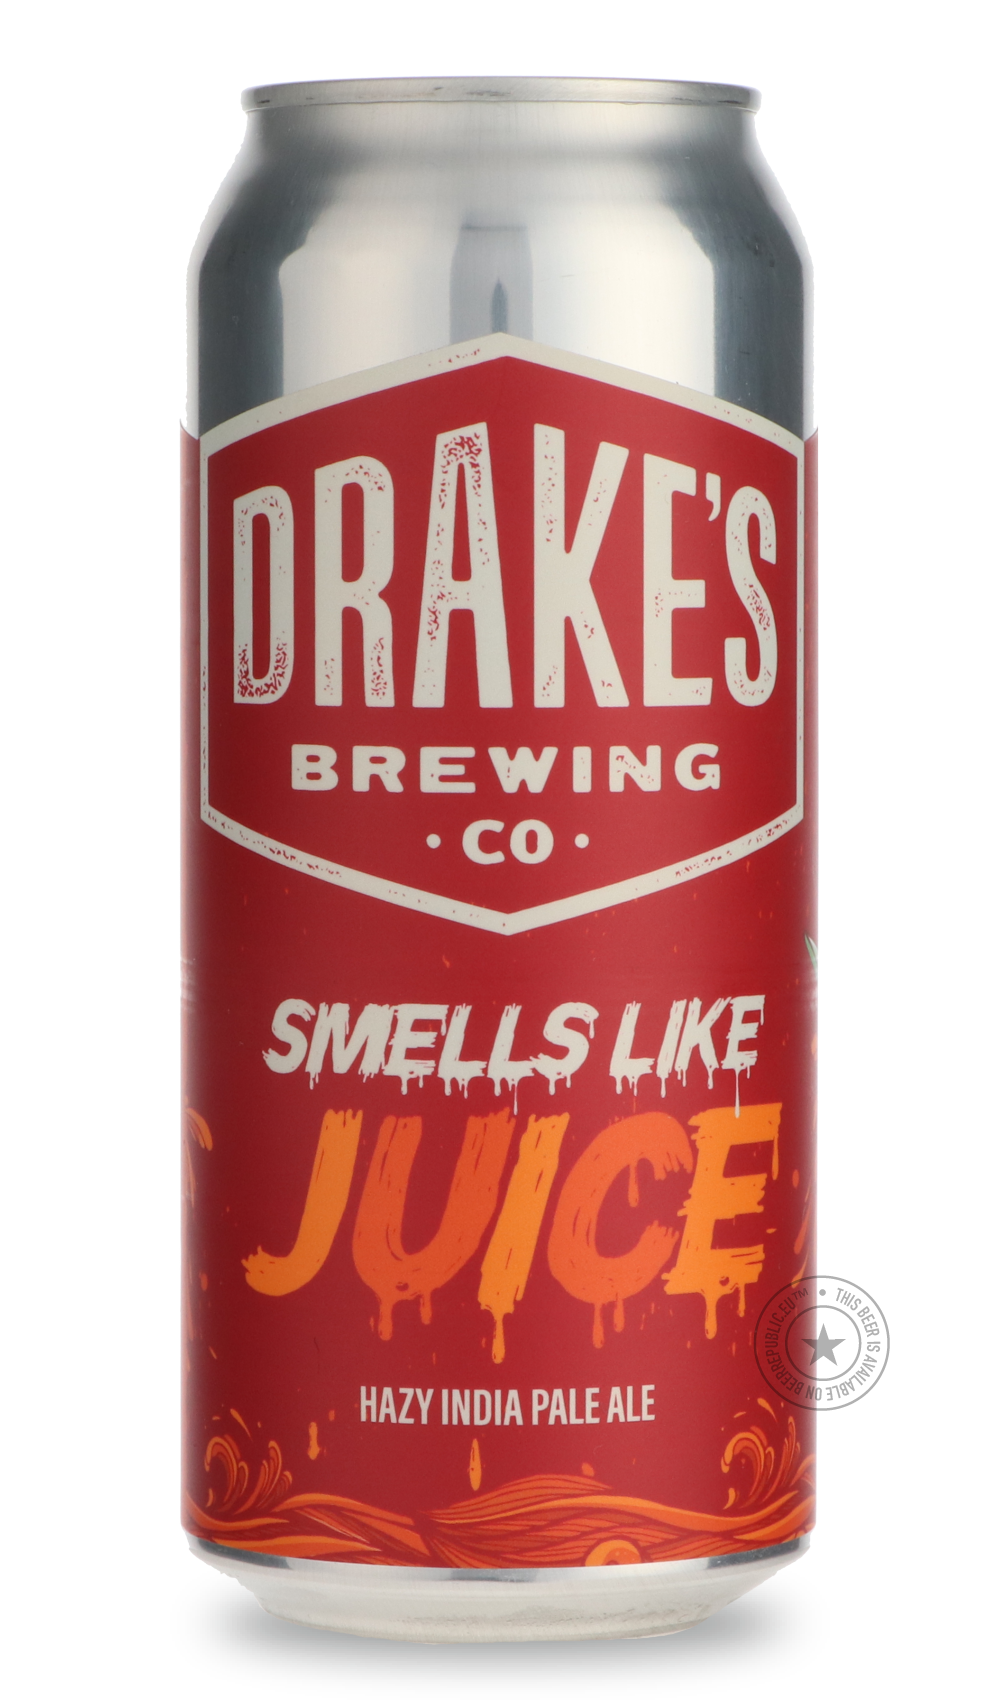 -Drake's- Smells Like Juice-IPA- Only @ Beer Republic - The best online beer store for American & Canadian craft beer - Buy beer online from the USA and Canada - Bier online kopen - Amerikaans bier kopen - Craft beer store - Craft beer kopen - Amerikanisch bier kaufen - Bier online kaufen - Acheter biere online - IPA - Stout - Porter - New England IPA - Hazy IPA - Imperial Stout - Barrel Aged - Barrel Aged Imperial Stout - Brown - Dark beer - Blond - Blonde - Pilsner - Lager - Wheat - Weizen - Amber - Barle